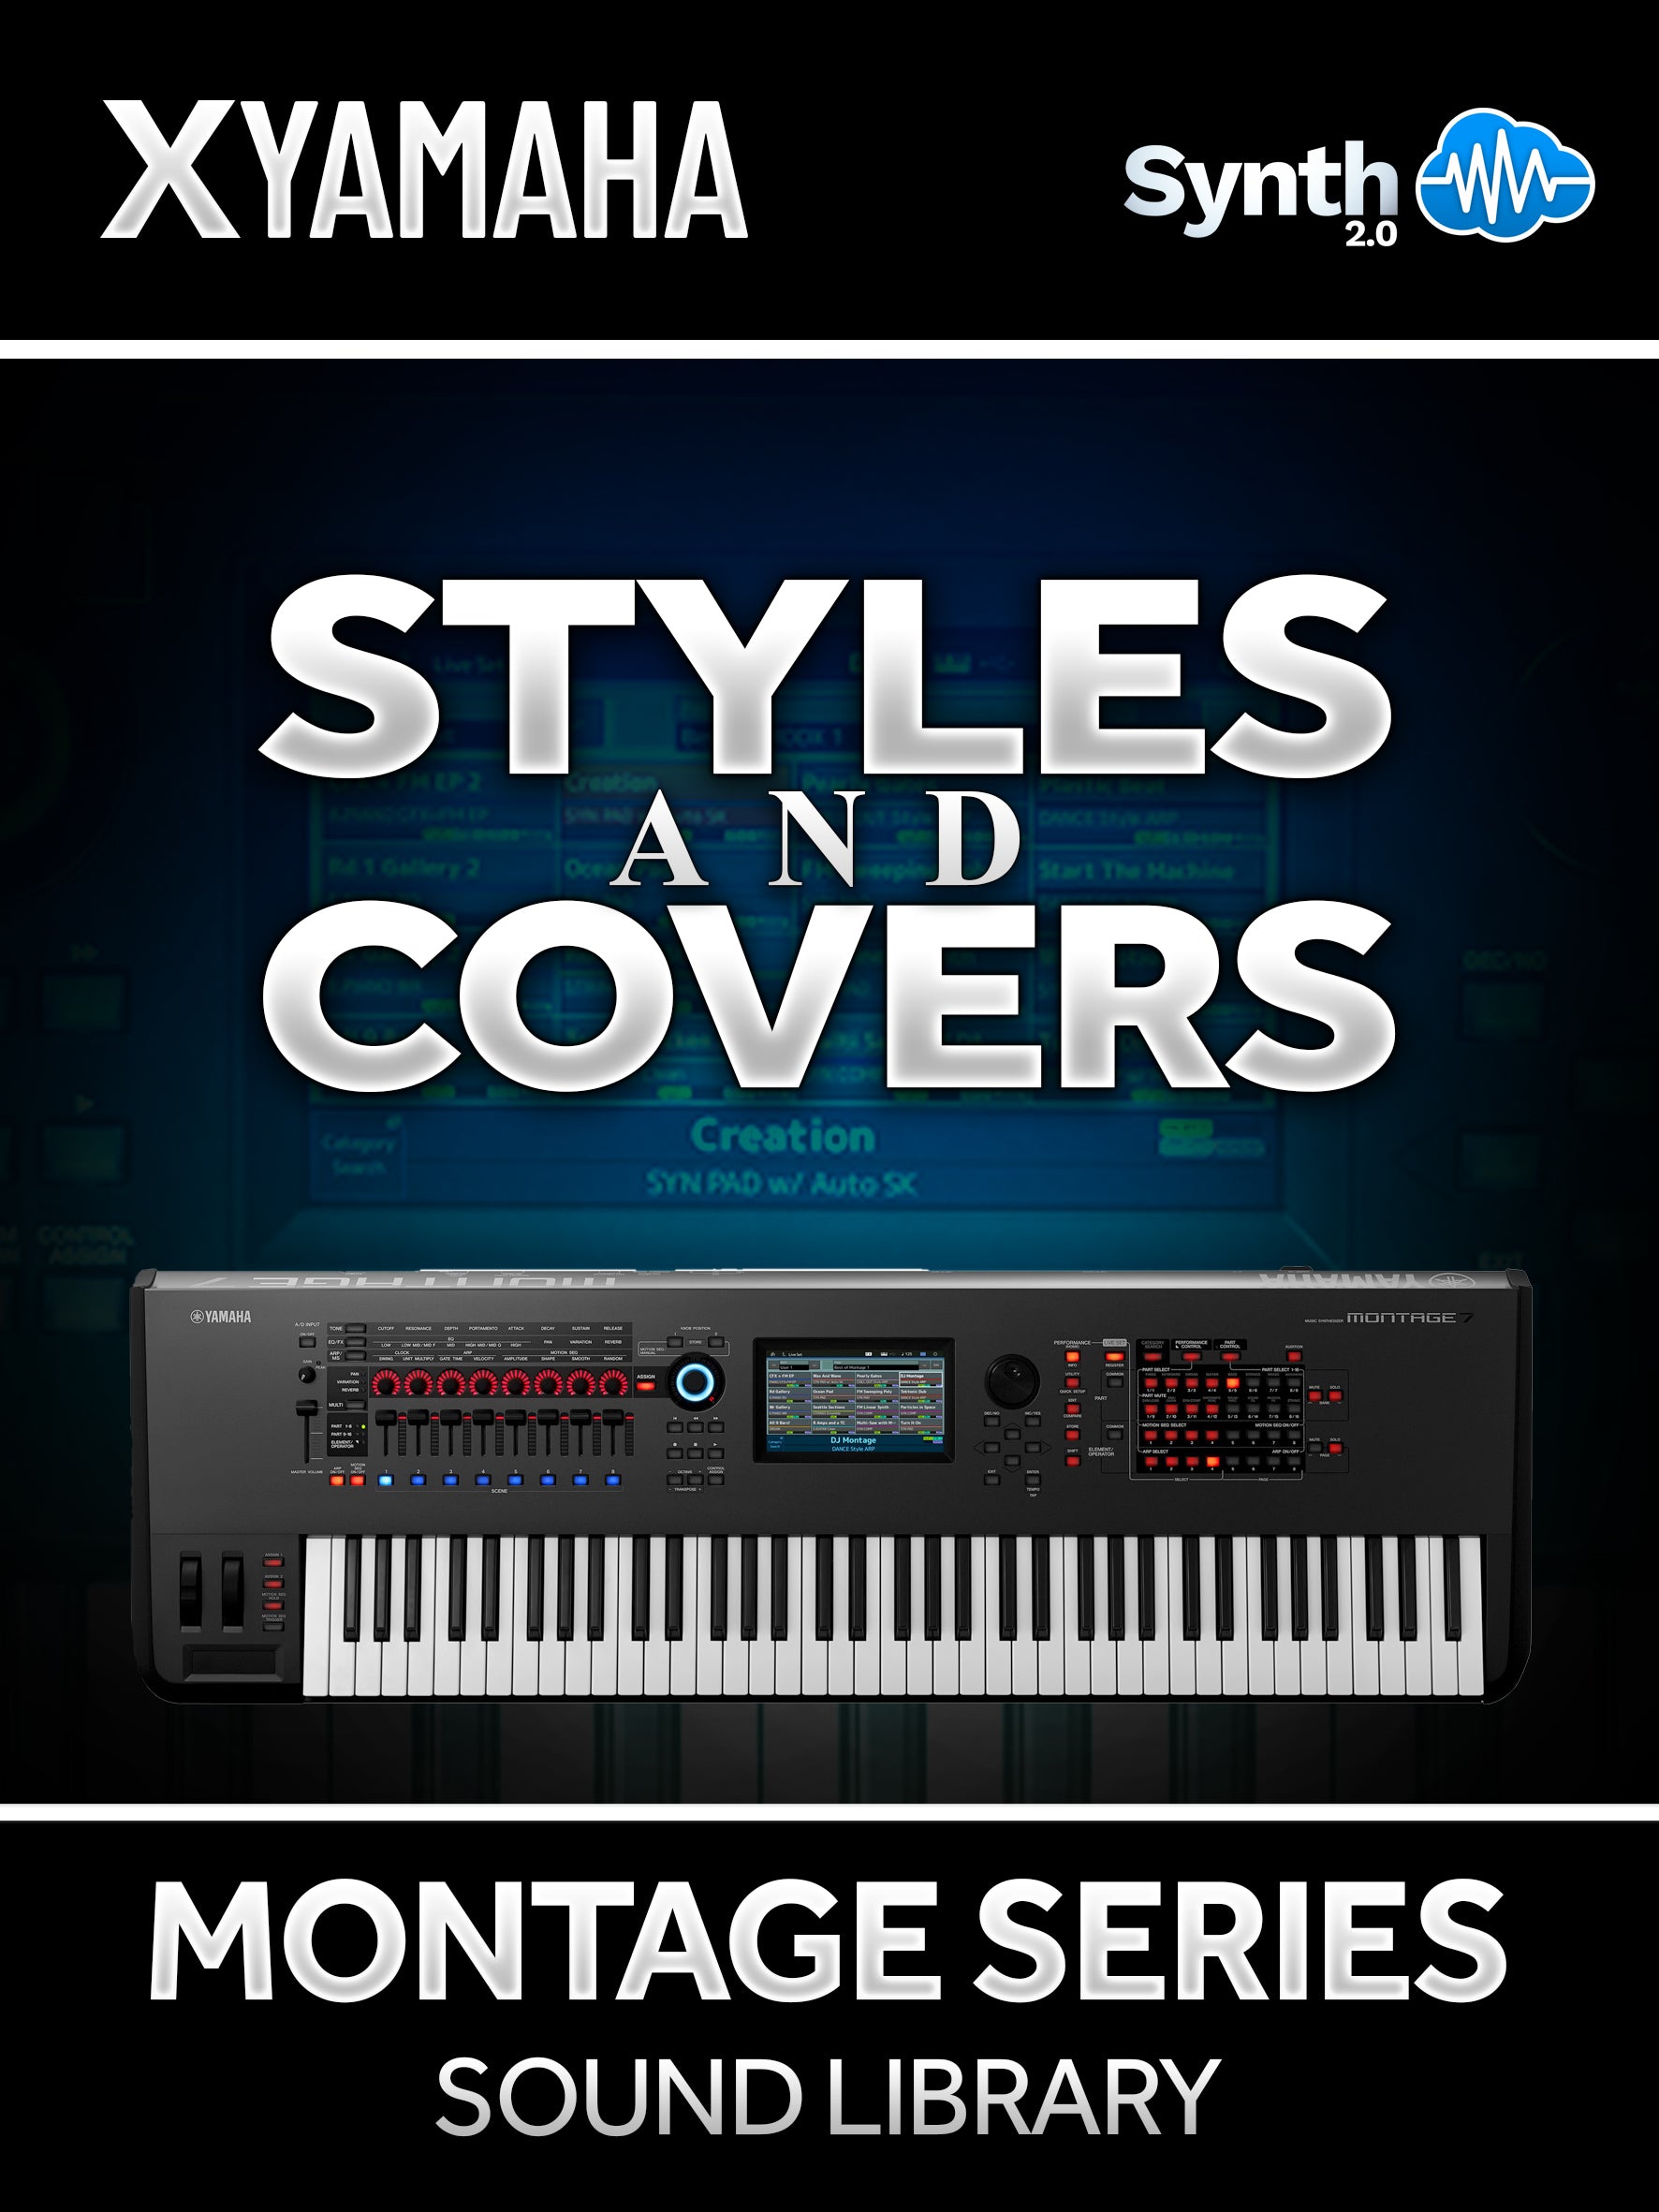 FPL047 - Styles and Covers - Yamaha MONTAGE / M ( 20 performances )